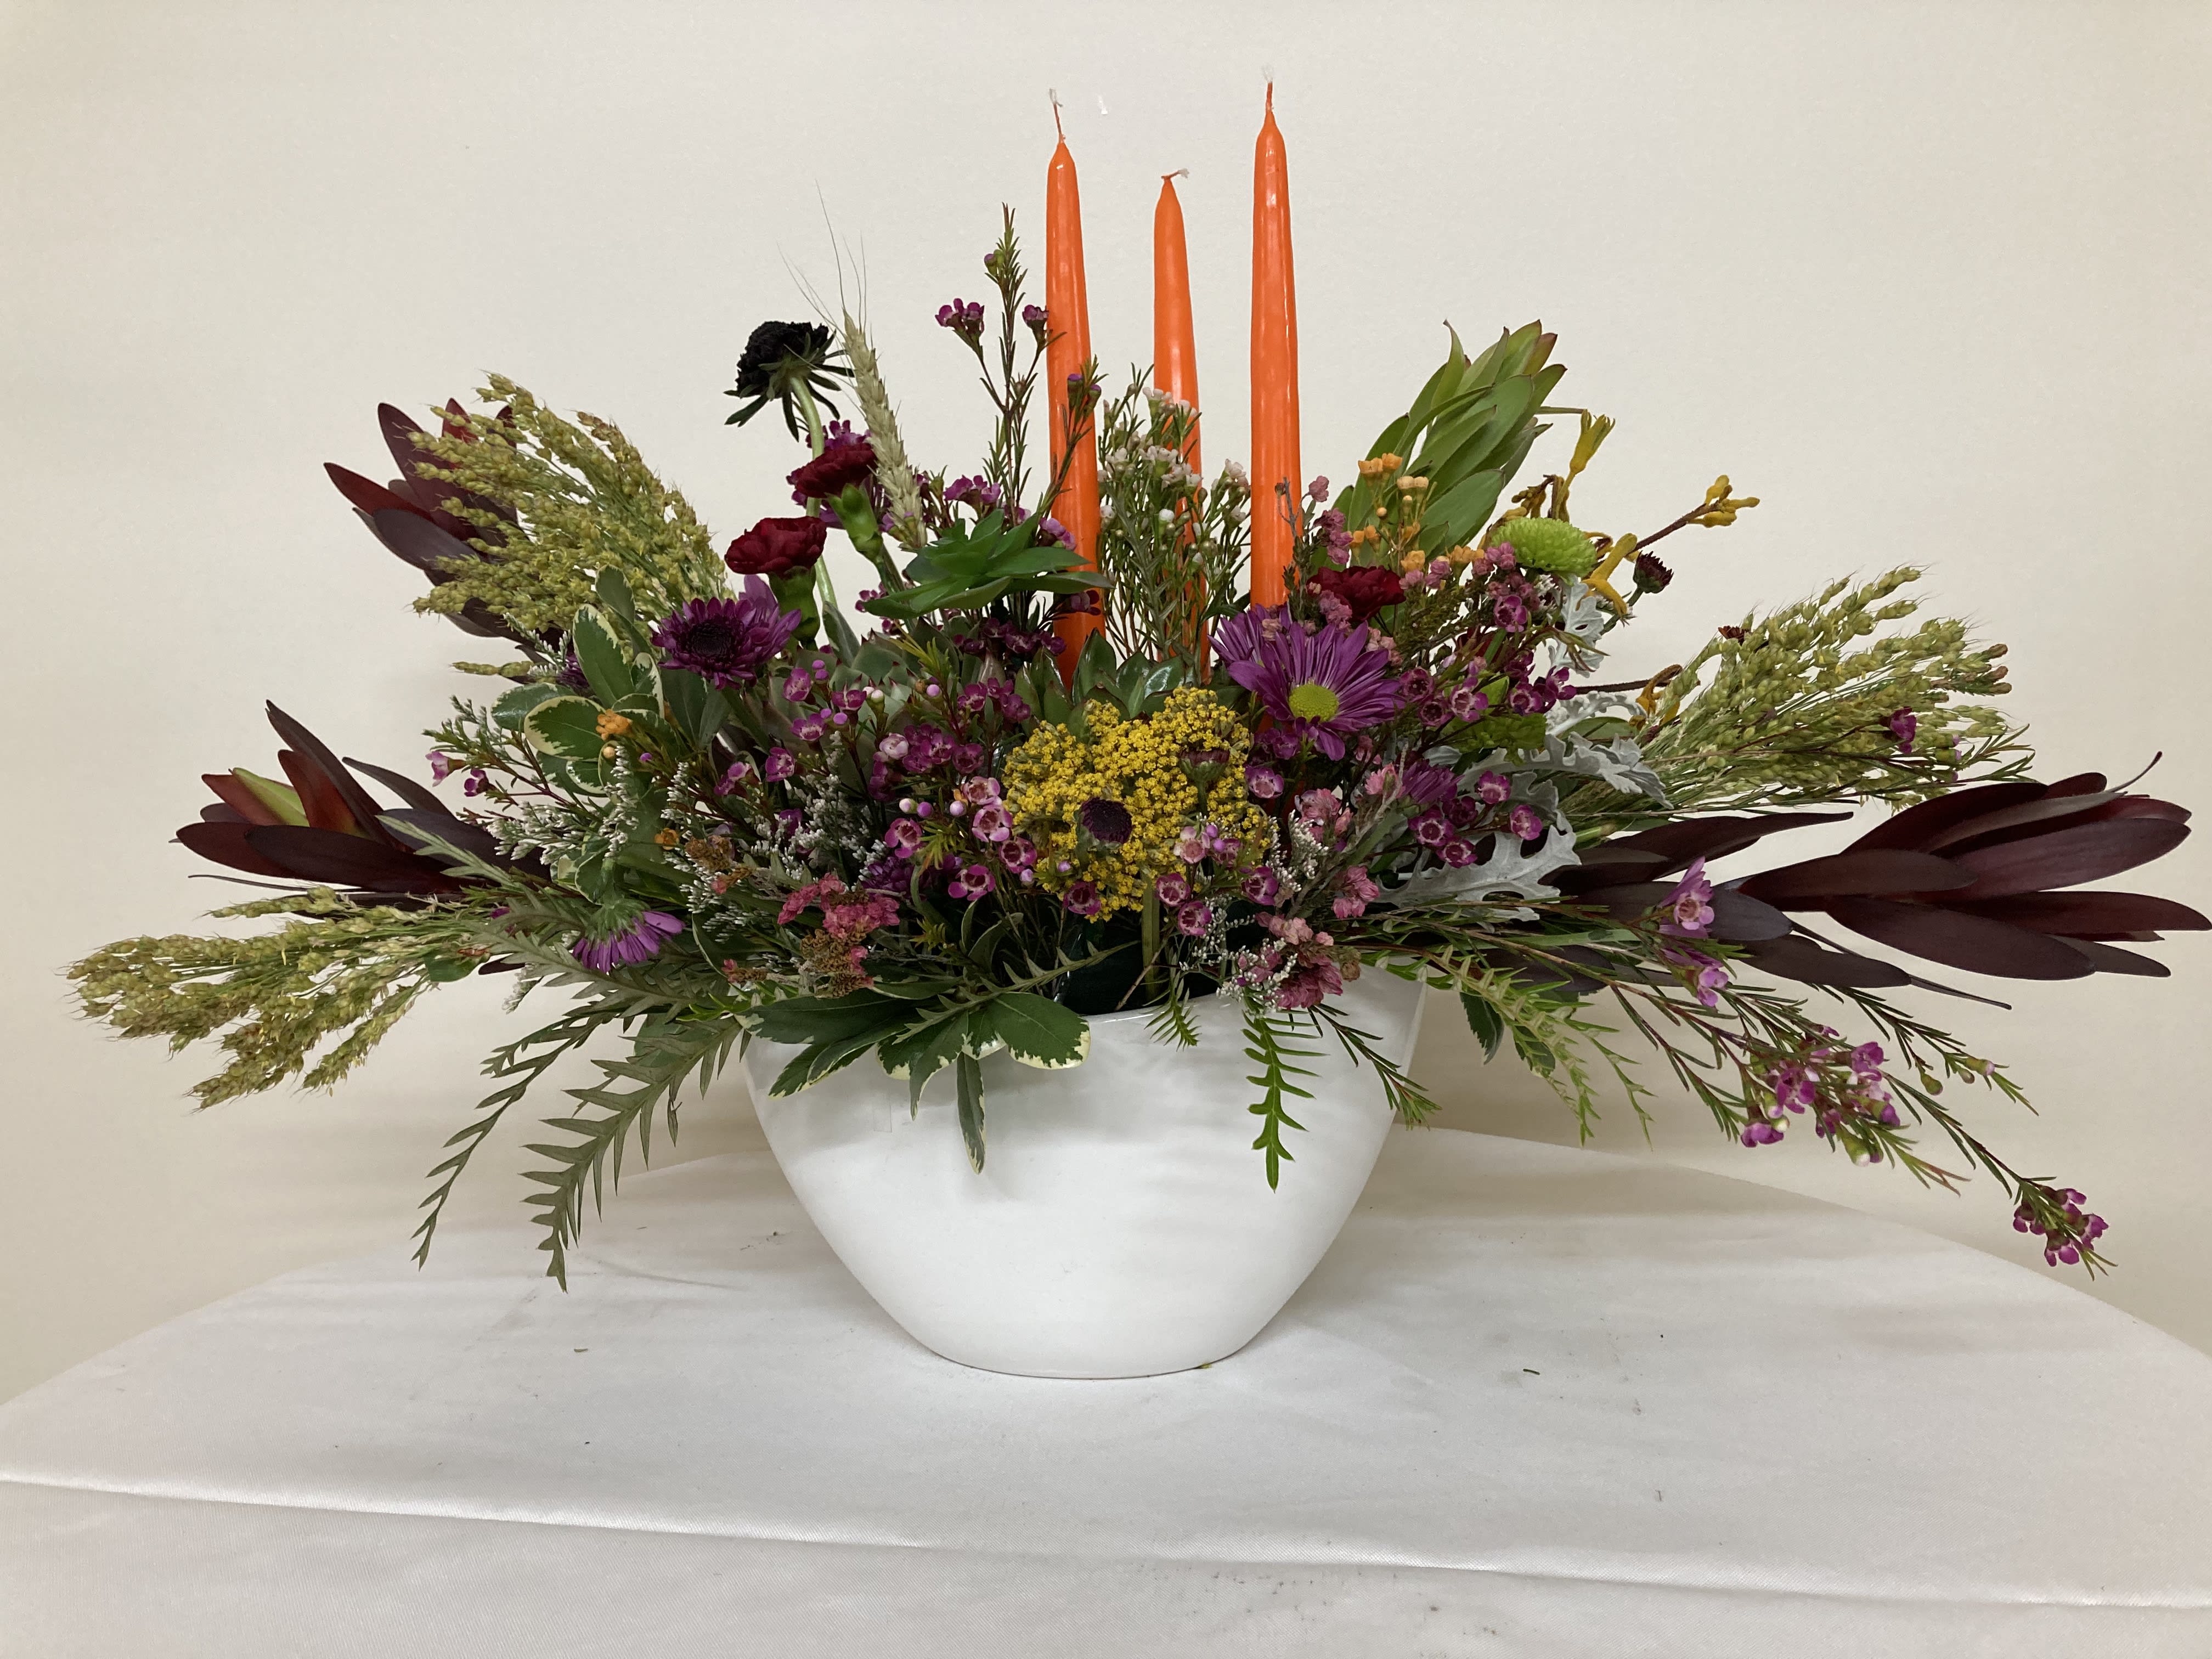 Autumn Mist - Three tapered candles rise above succulents, daisies, and the colorful flowers of autumn.